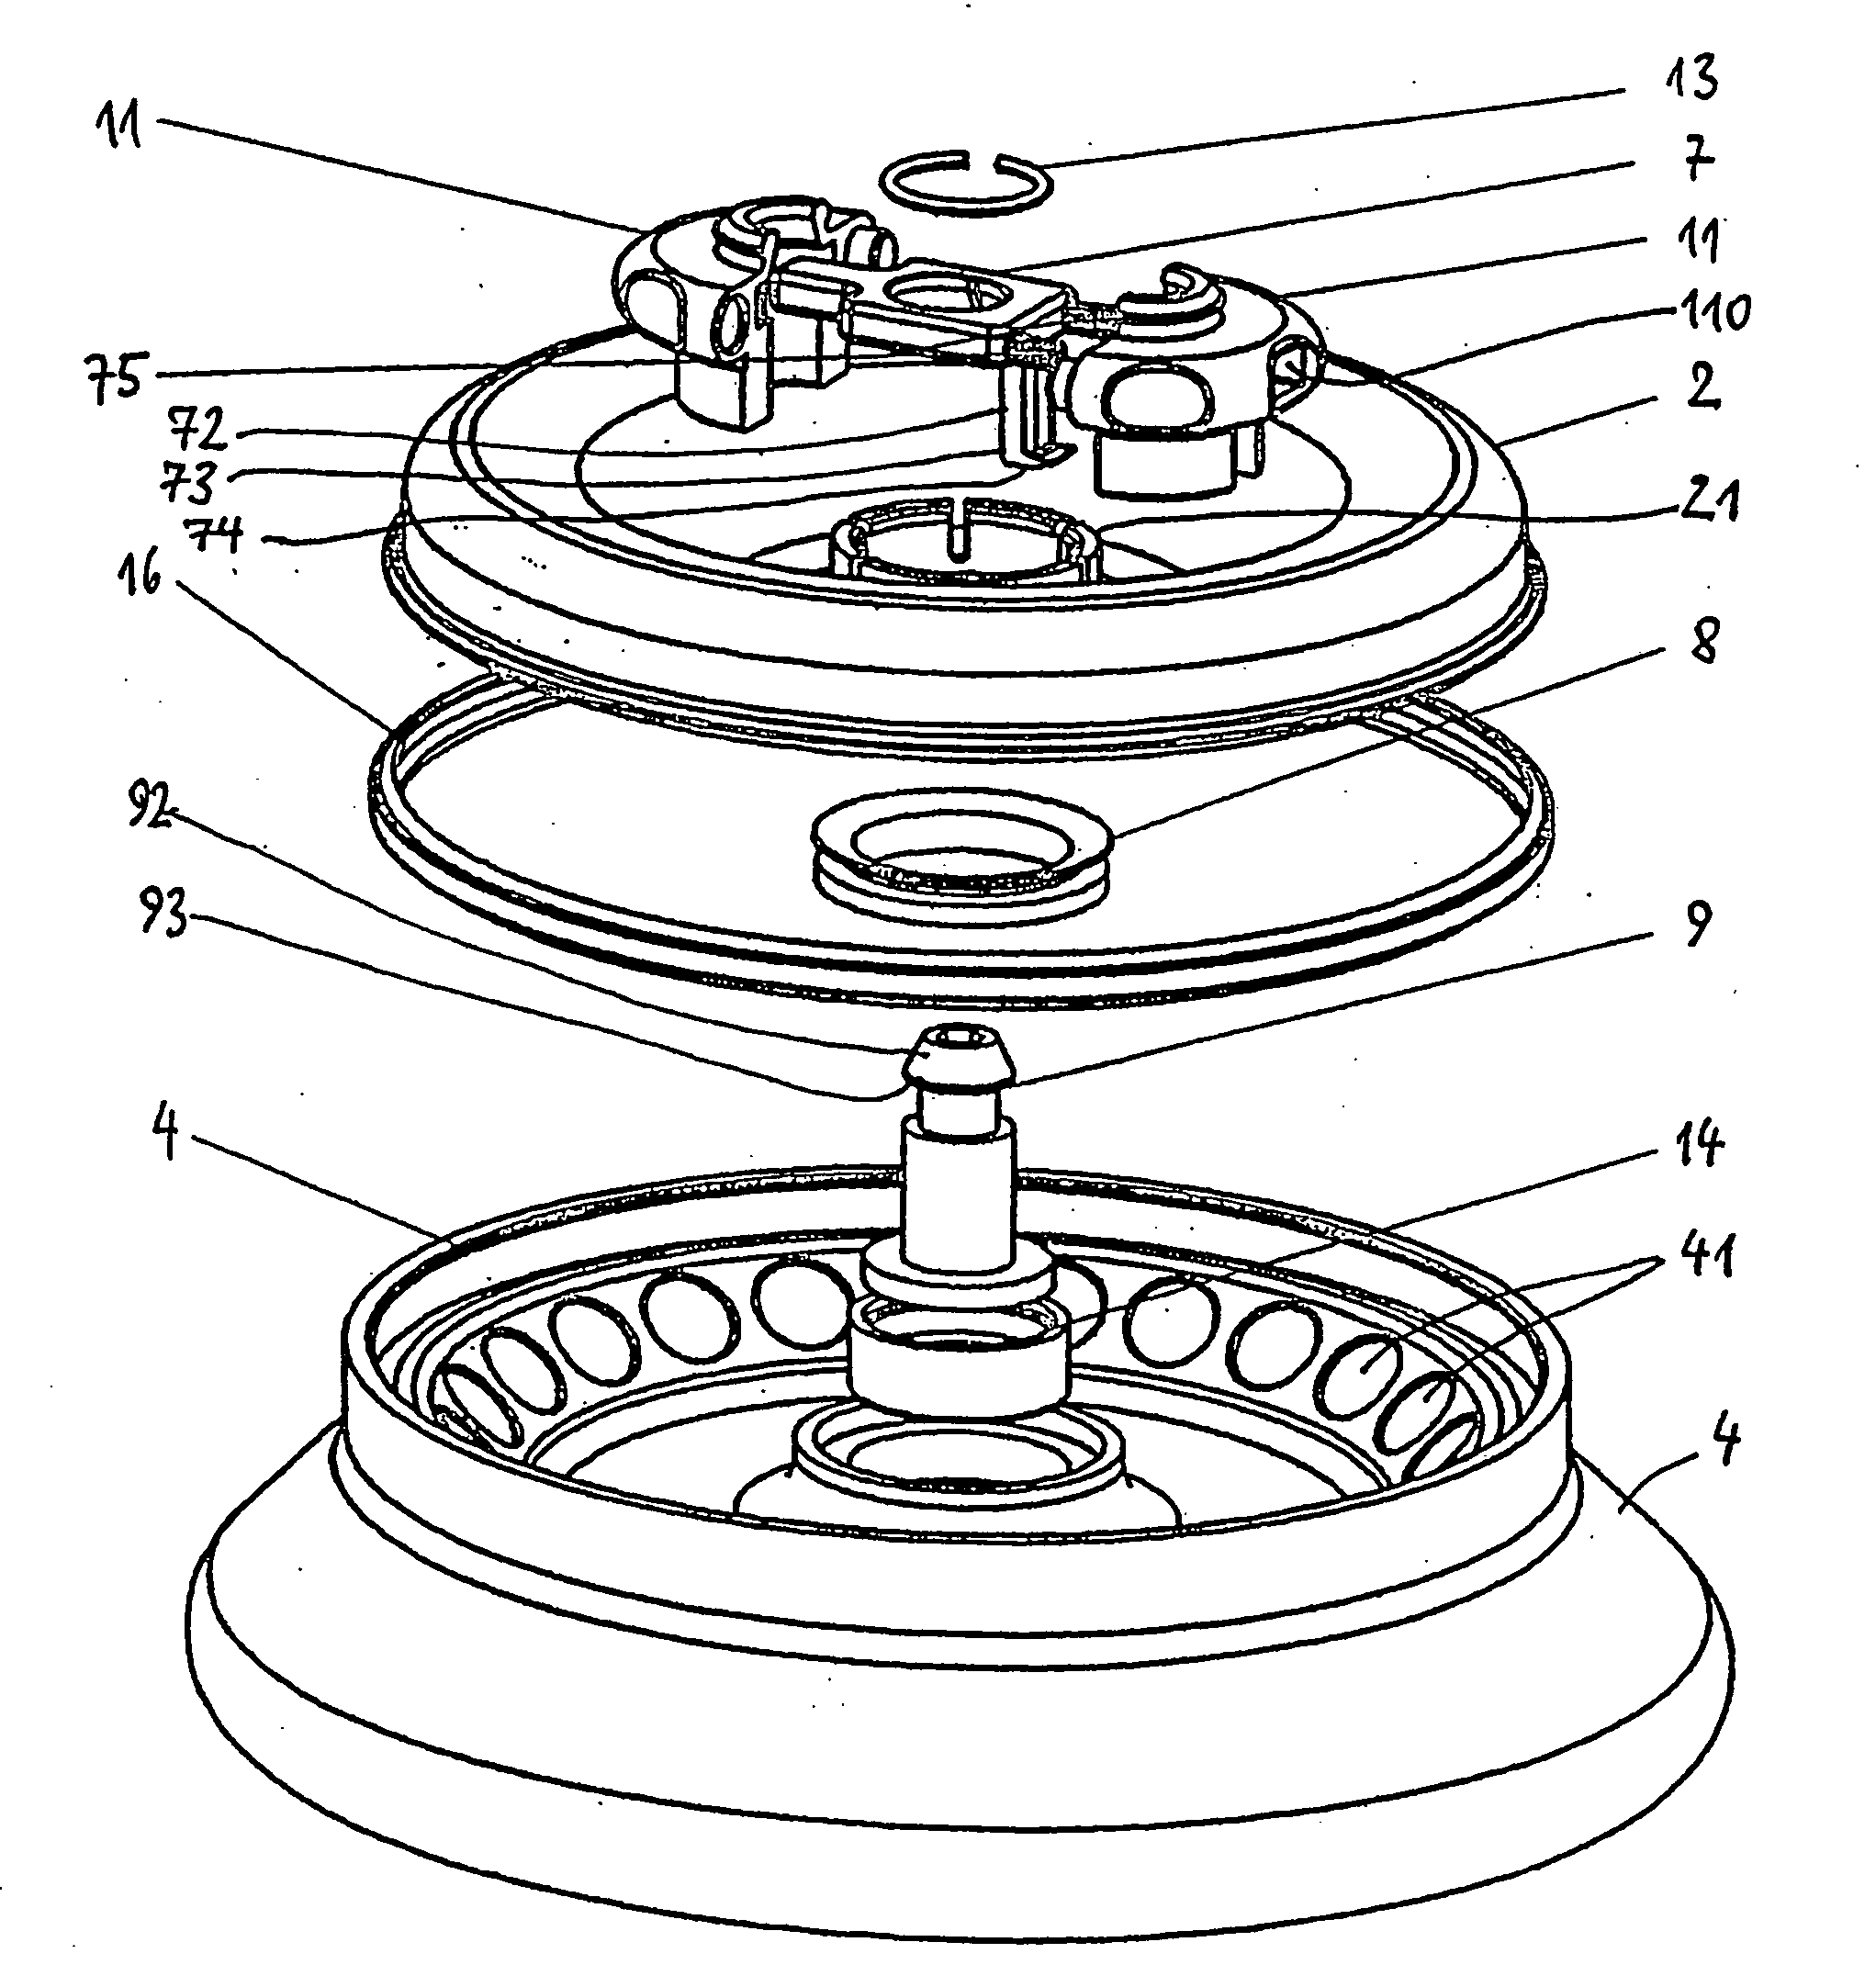 Fixing device for a centrifuge rotor cover